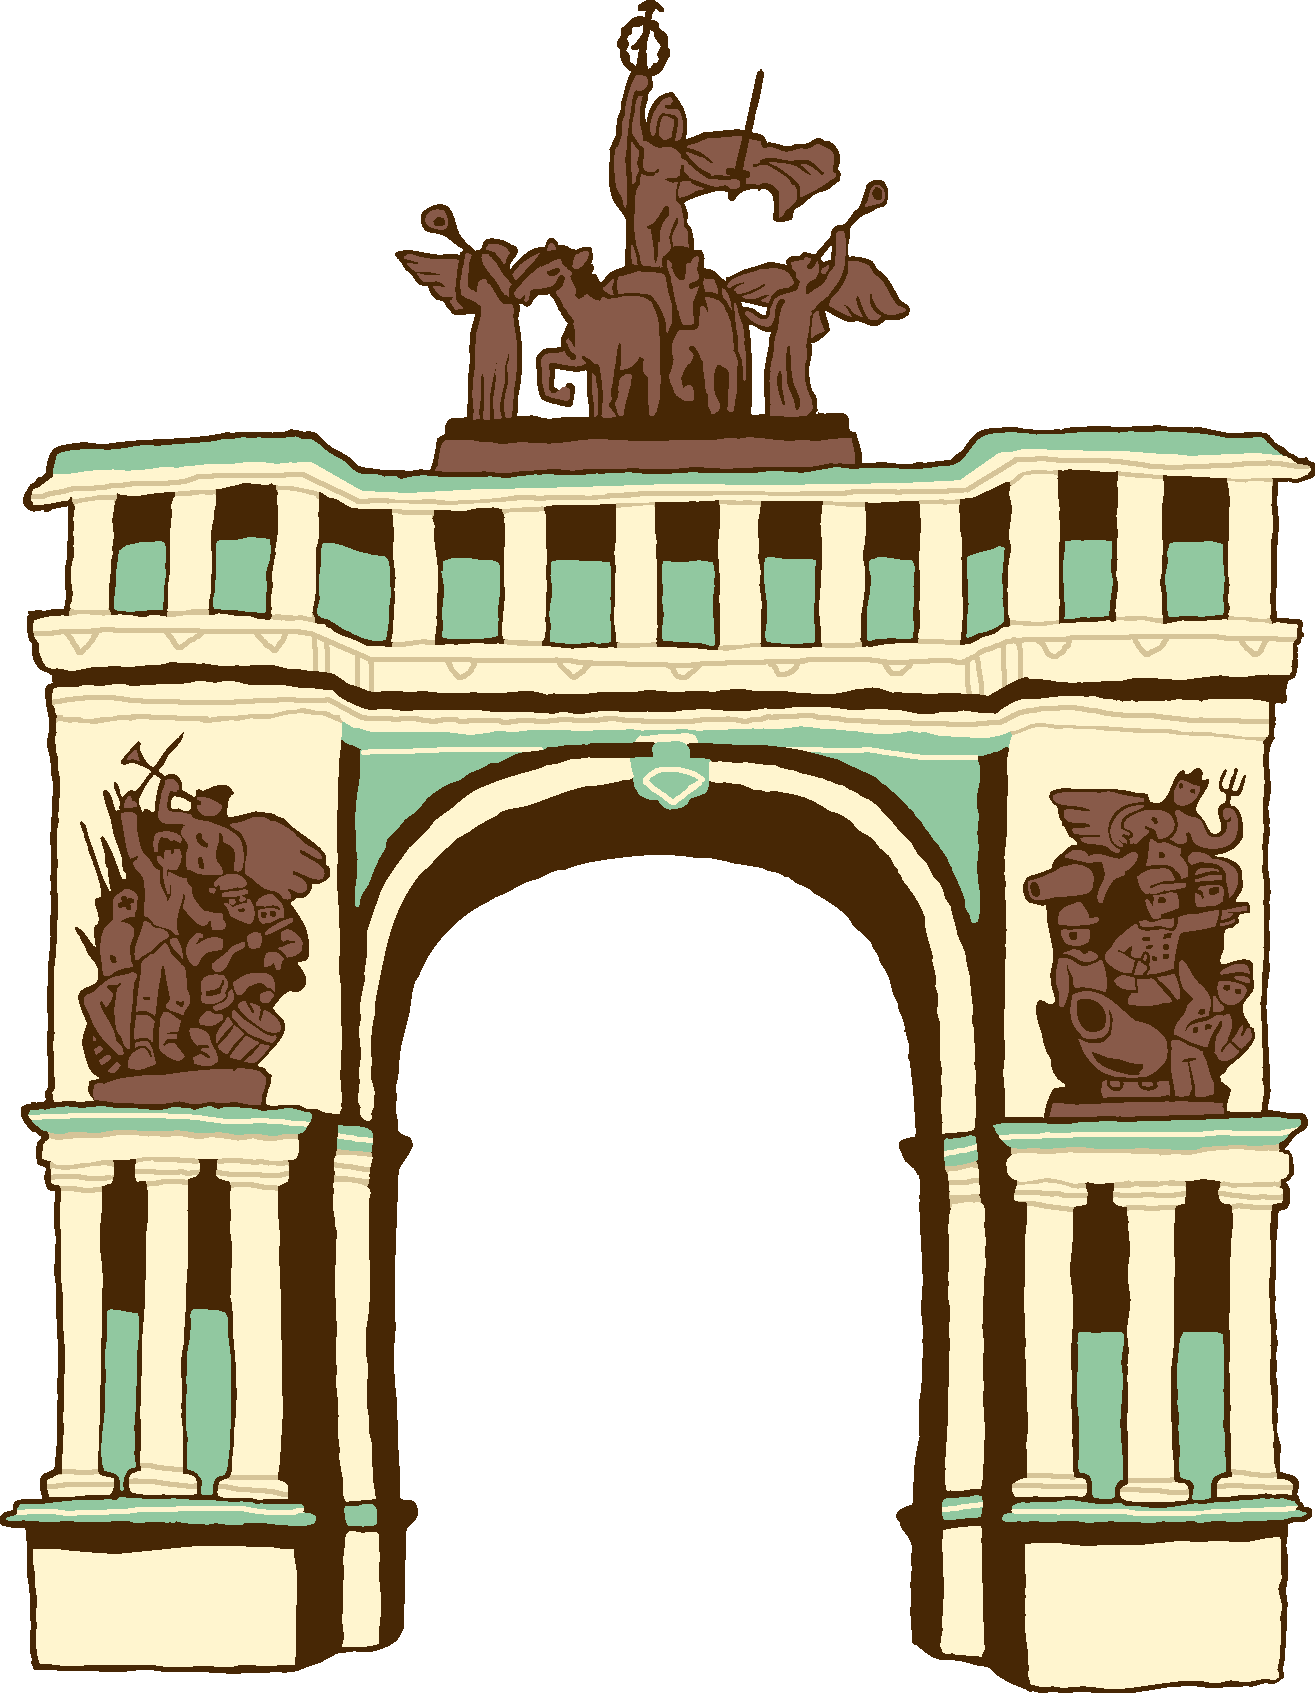 This is a cartoon version of the Grand Army Plaza arch.